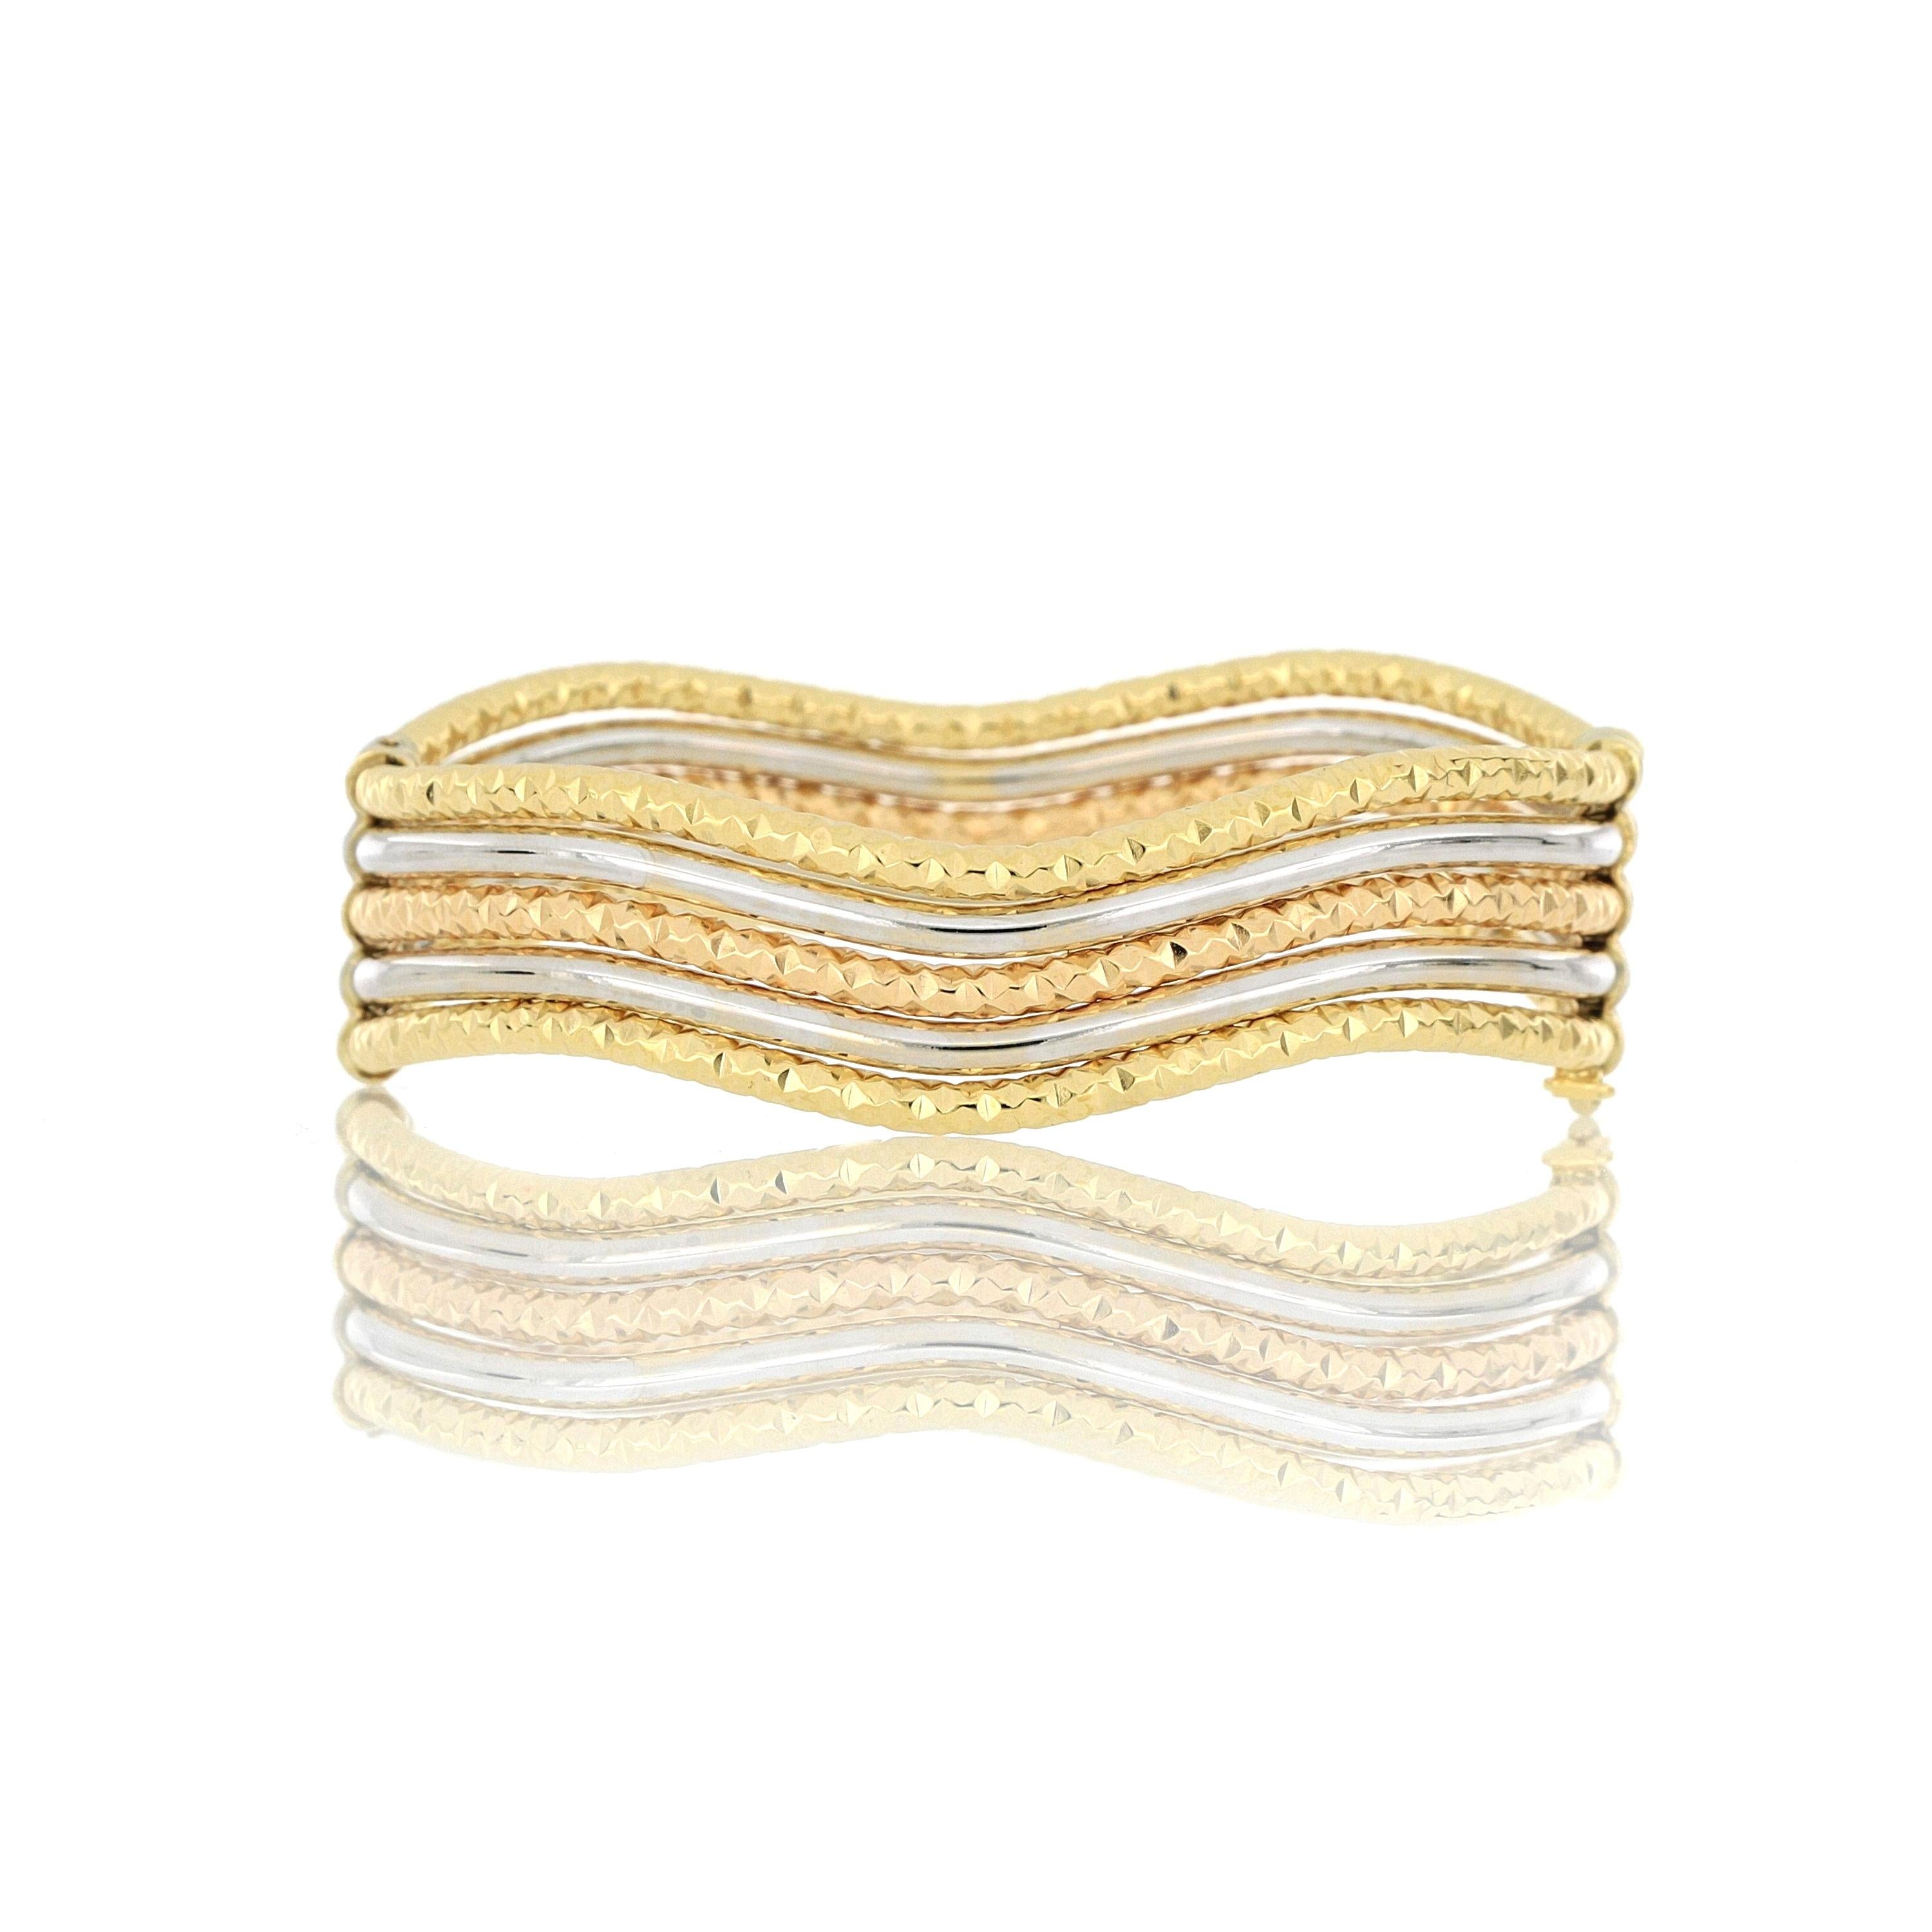 A stylish 18 Karat gold tricolour bangle, Italian made, composed of white gold, yellow gold and rose gold, which can be worn for any occasion.
O’Che 1867 was founded one and a half centuries ago in Macau. The brand is renowned for its high jewellery